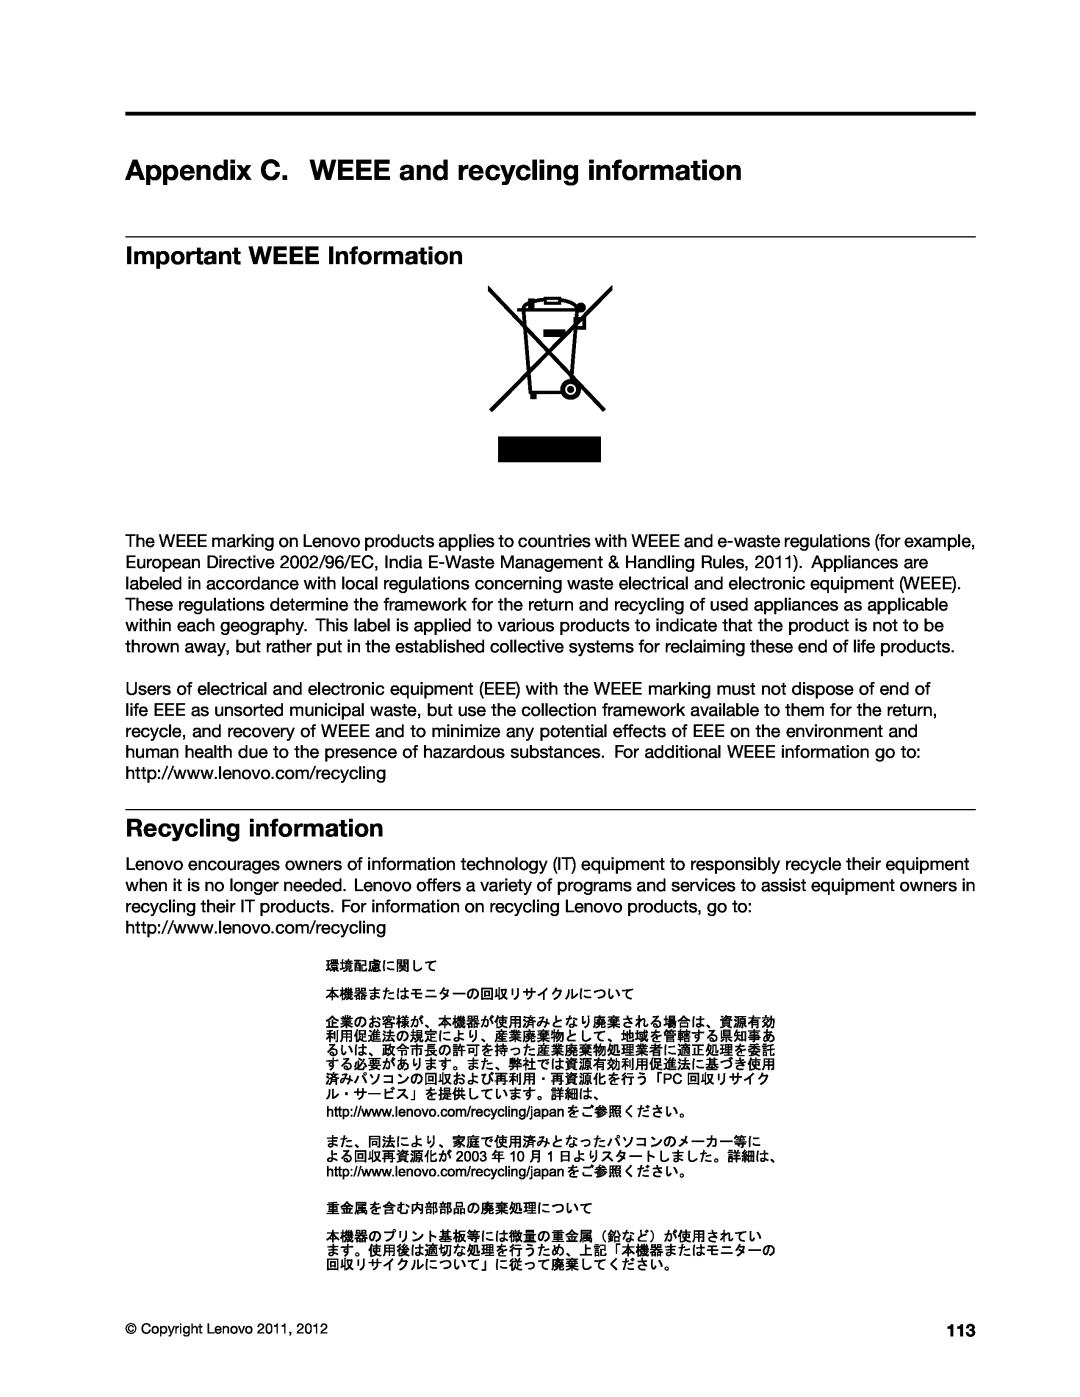 Lenovo 1994, 1993, 1995, 1986 Appendix C. WEEE and recycling information, Important WEEE Information, Recycling information 